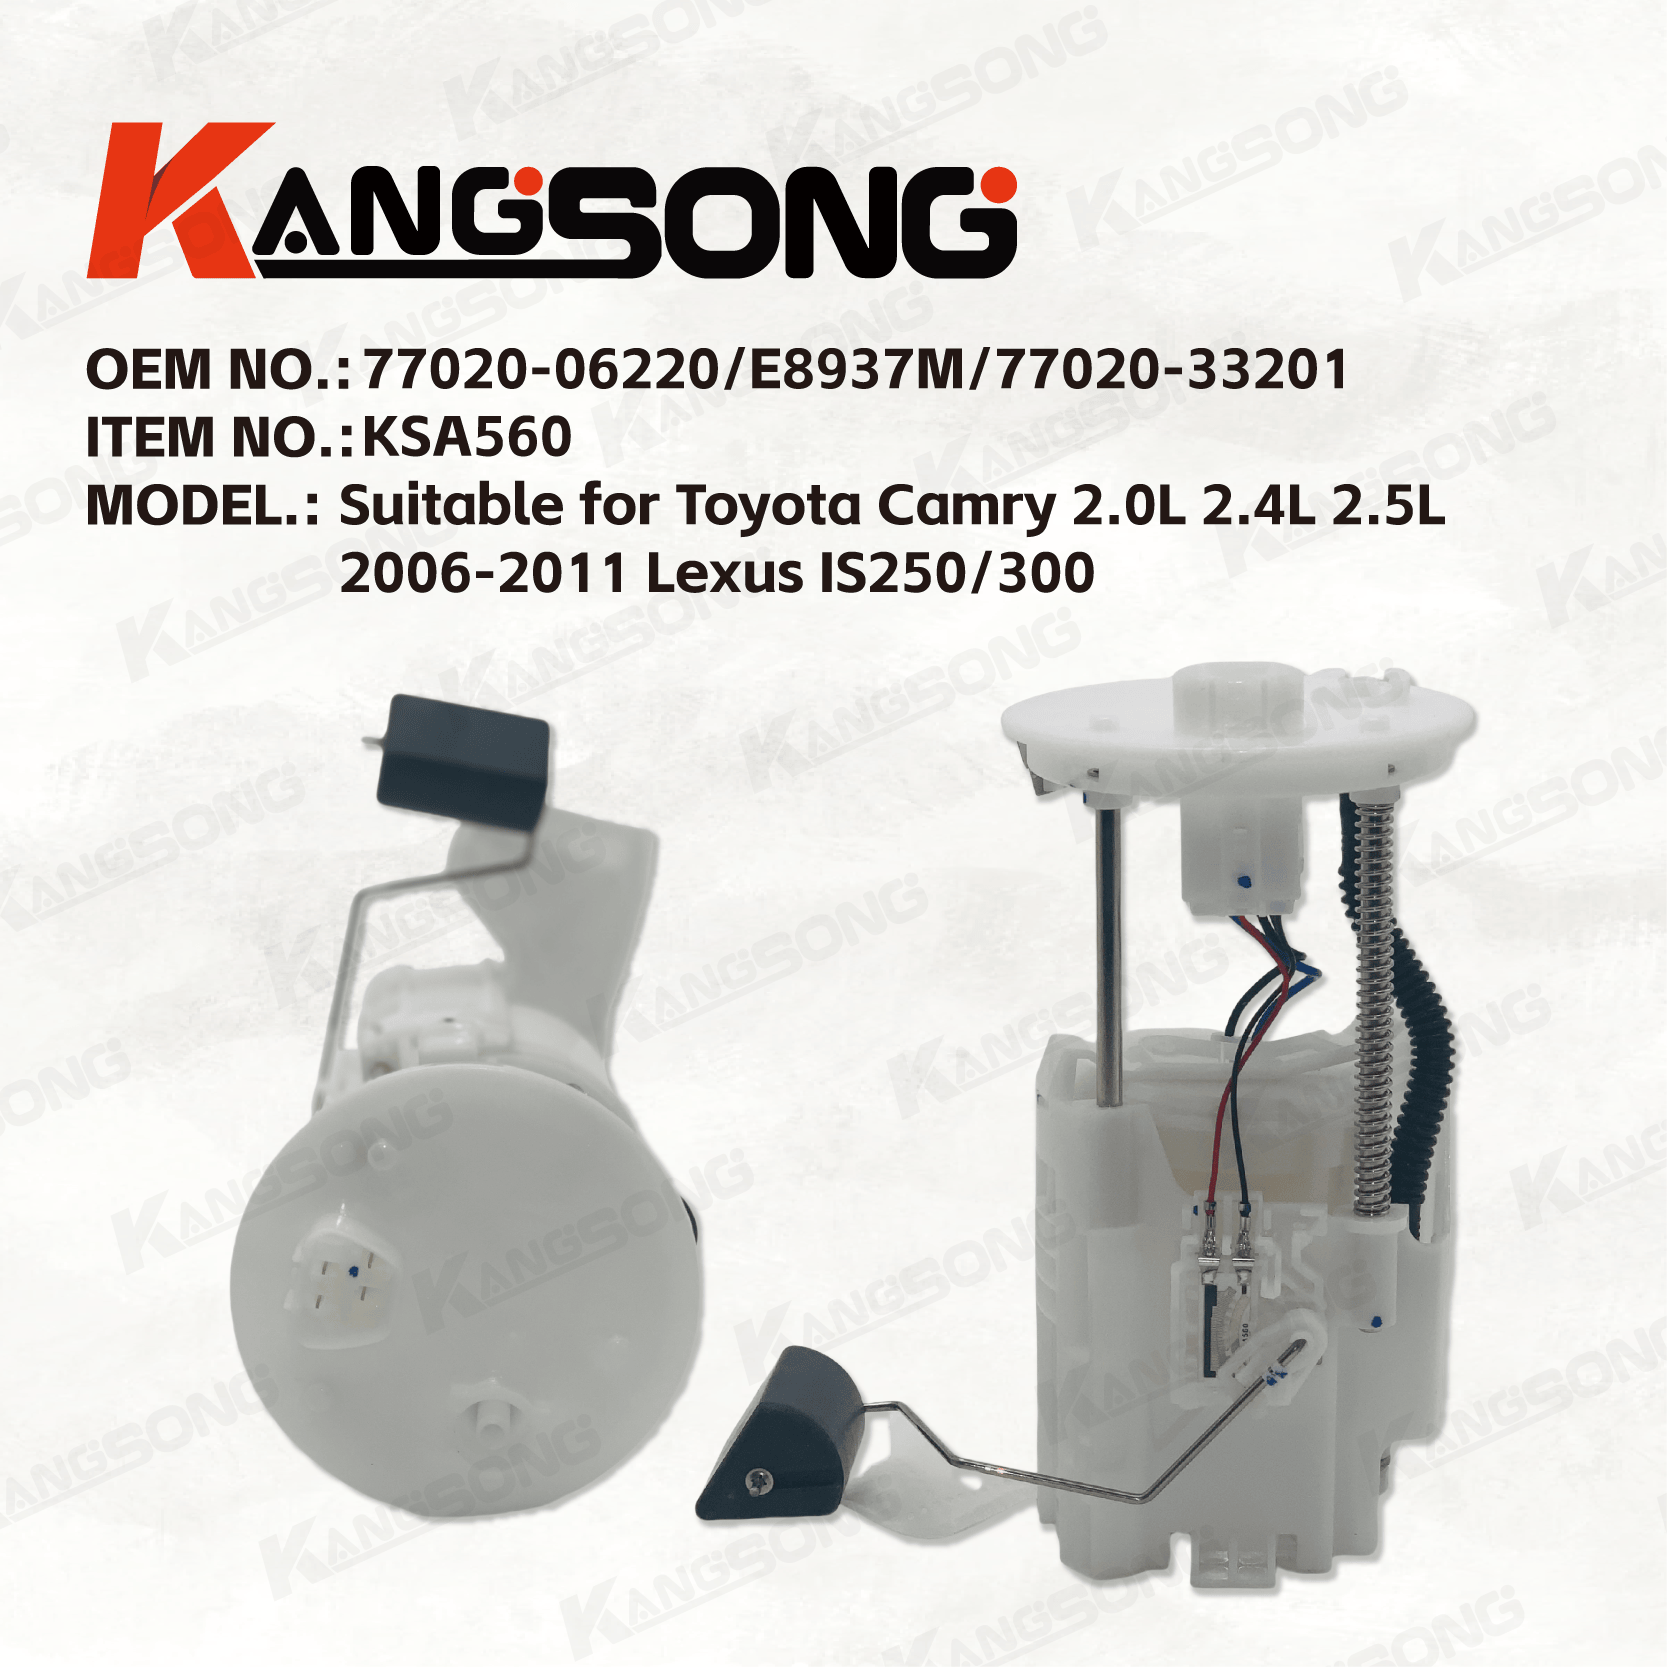 Applicable to Toyota Camry/77020-06090 E8937M 77020-33201 89461-46020 77020-06090/Fuel Pump Assembly/KS-A560